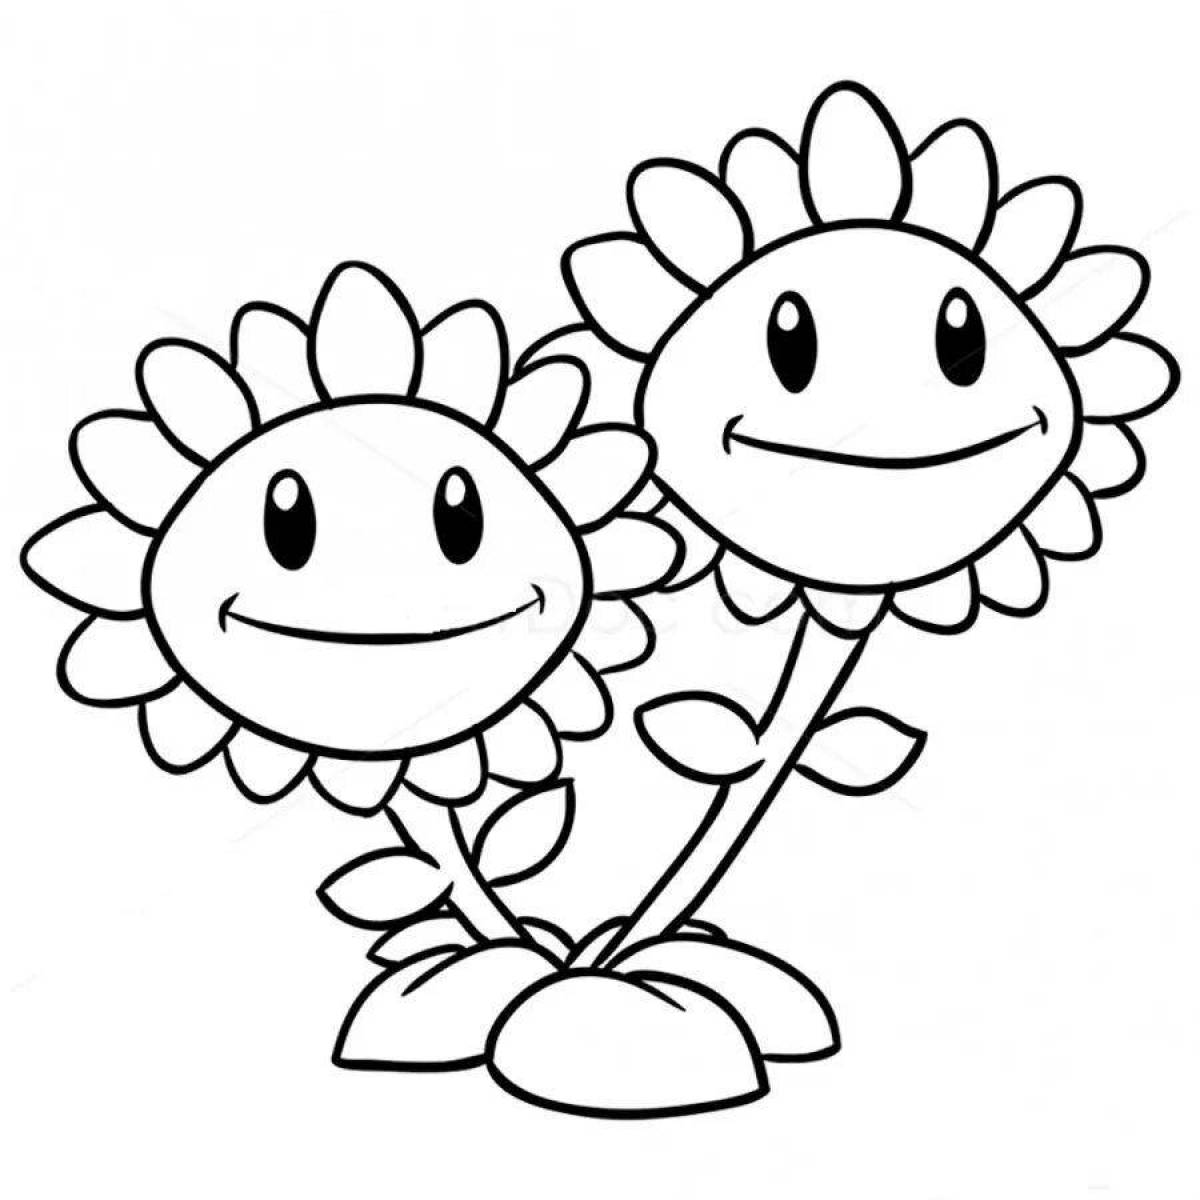 Plants vs zombies coloring page